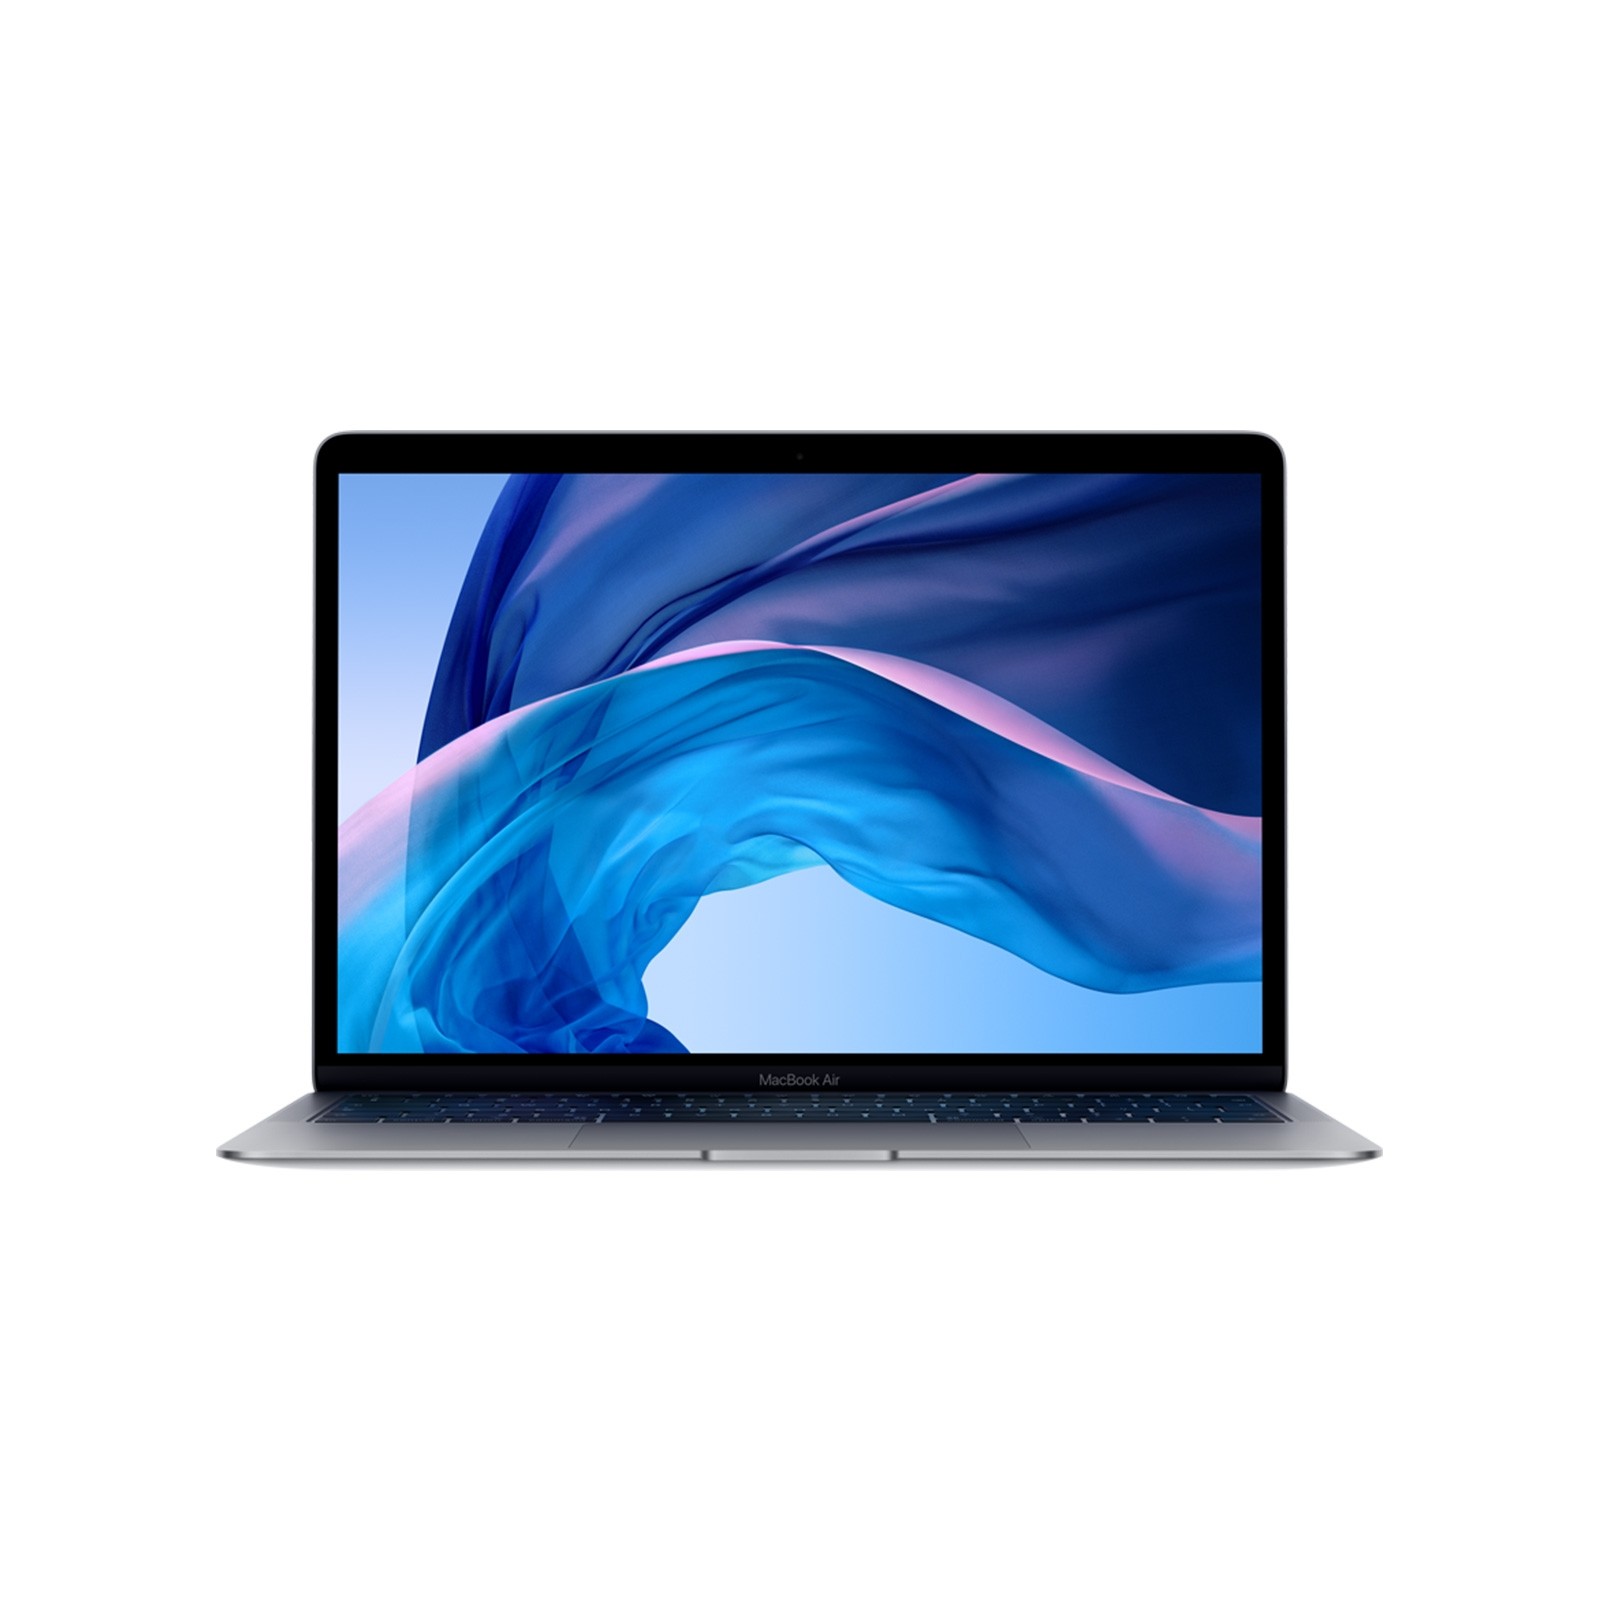 MacBook Air 13-Inch “Core i5” 1.6GHz (Late 2018) 8GB RAM 128GB SSD Space Gray (6 Month Warranty)